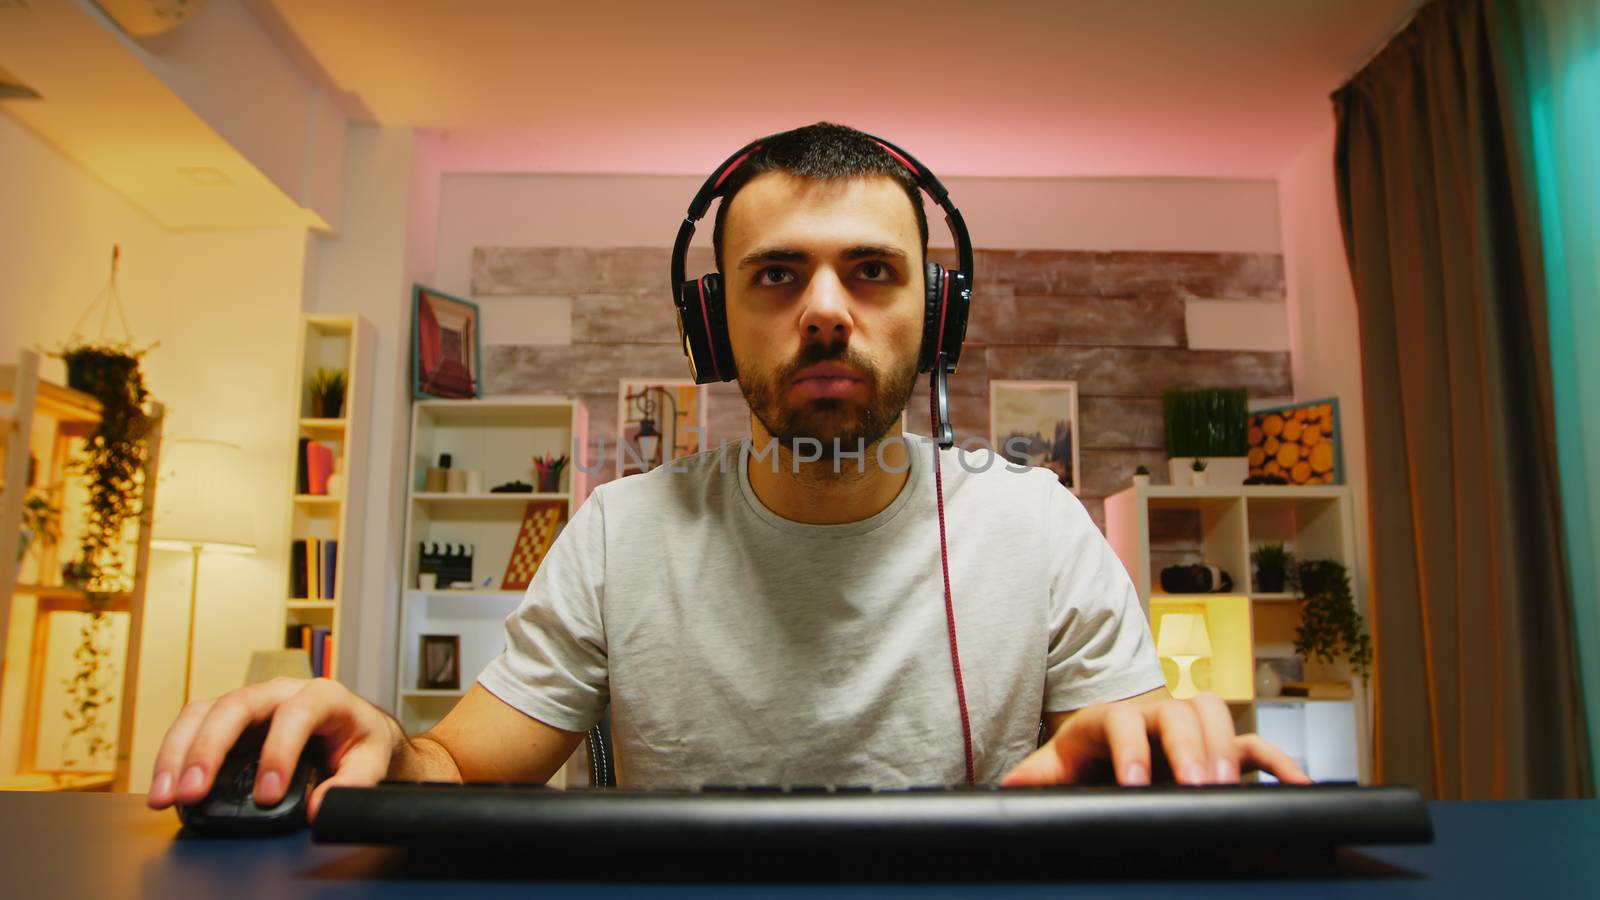 Pov of concentrated young professional gamer by DCStudio